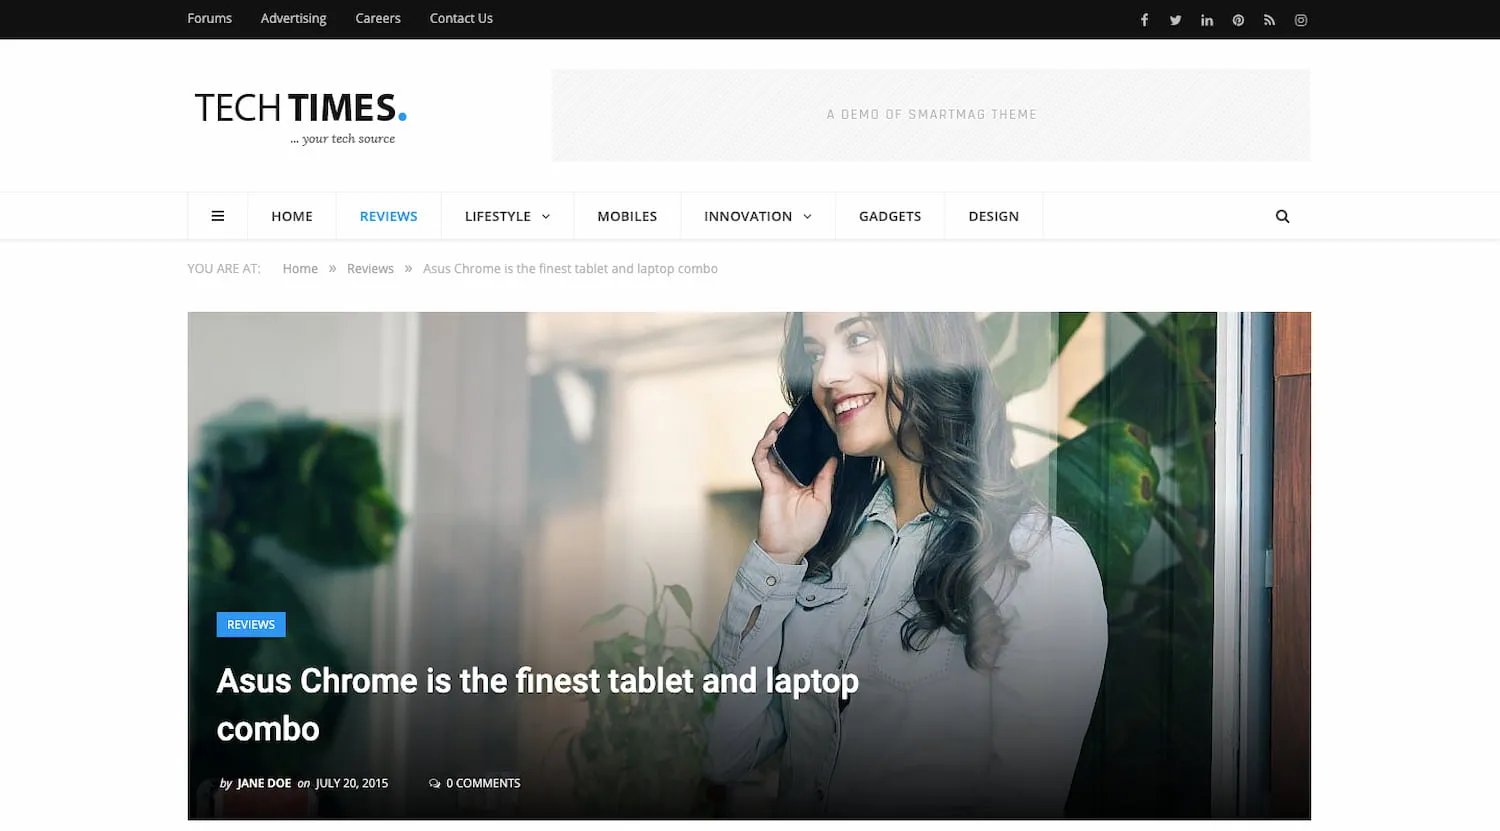 SmartMags Tech Times theme demo includes product reviews